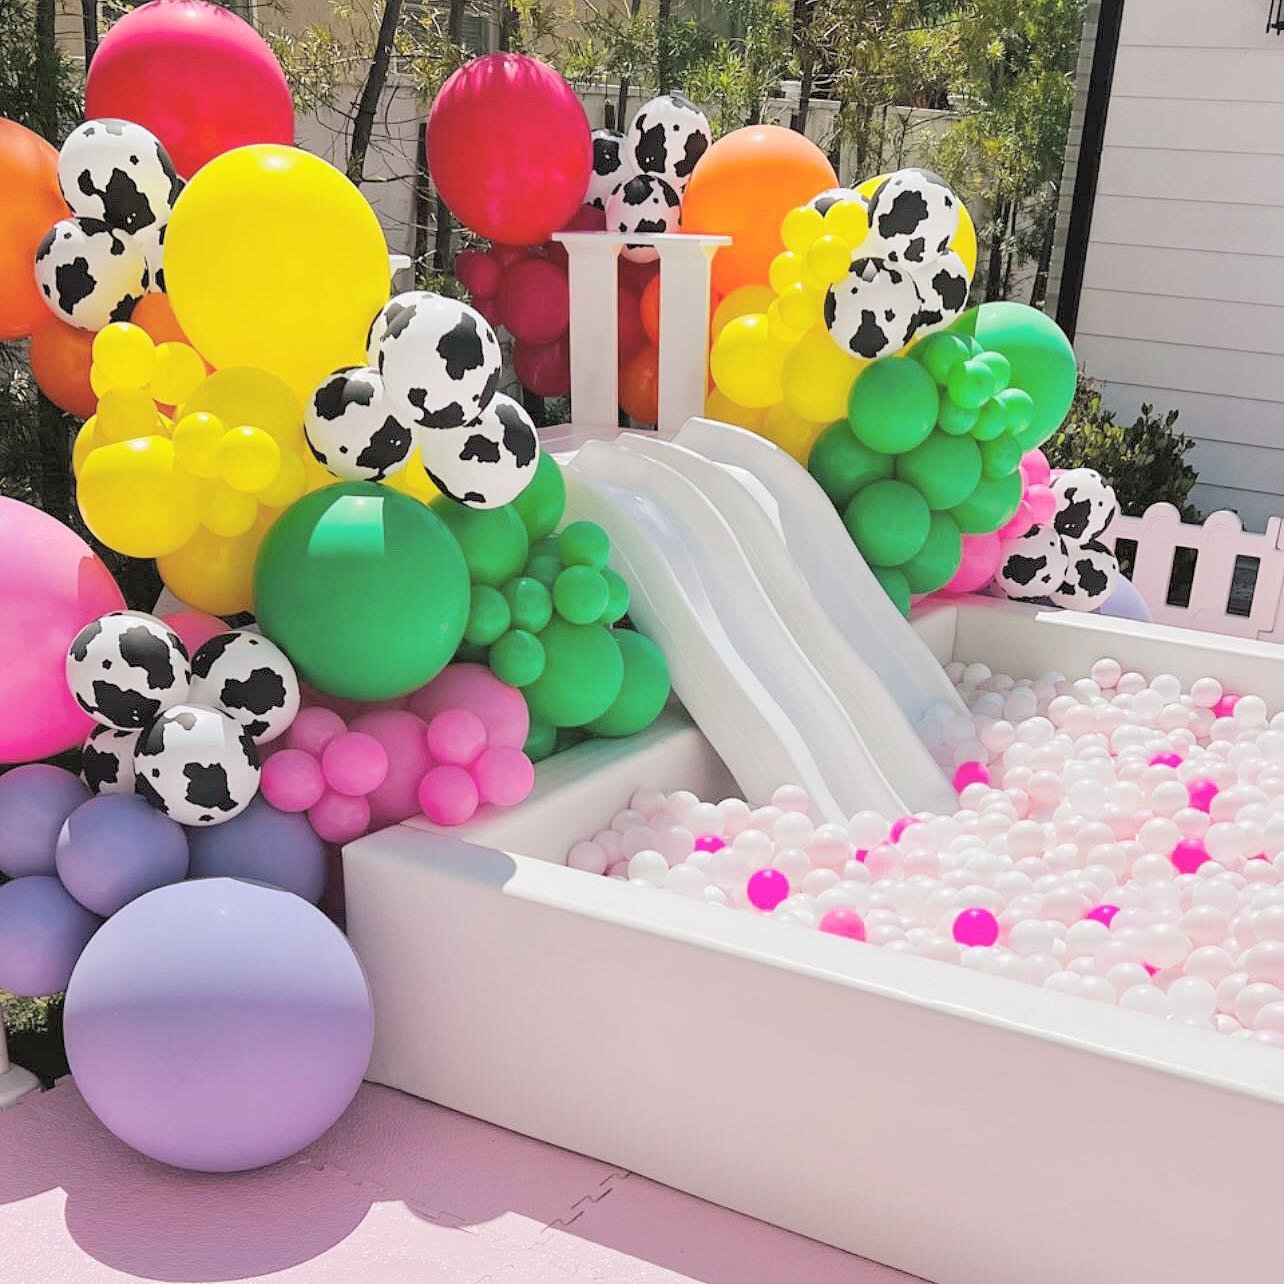 🌈 Be a Rainbow in someone else&rsquo;s cloud 
.
Cute farm rainbow theme , why fit in when you can stand out with creativity 🌈🐄🐷🐴🐓🌈
.
&bull; Ballpit ✔️
&bull; Toddler double slides✔️
&bull;Balloon Garland. Add on ✔️

&bull;&bull;&bull;We create